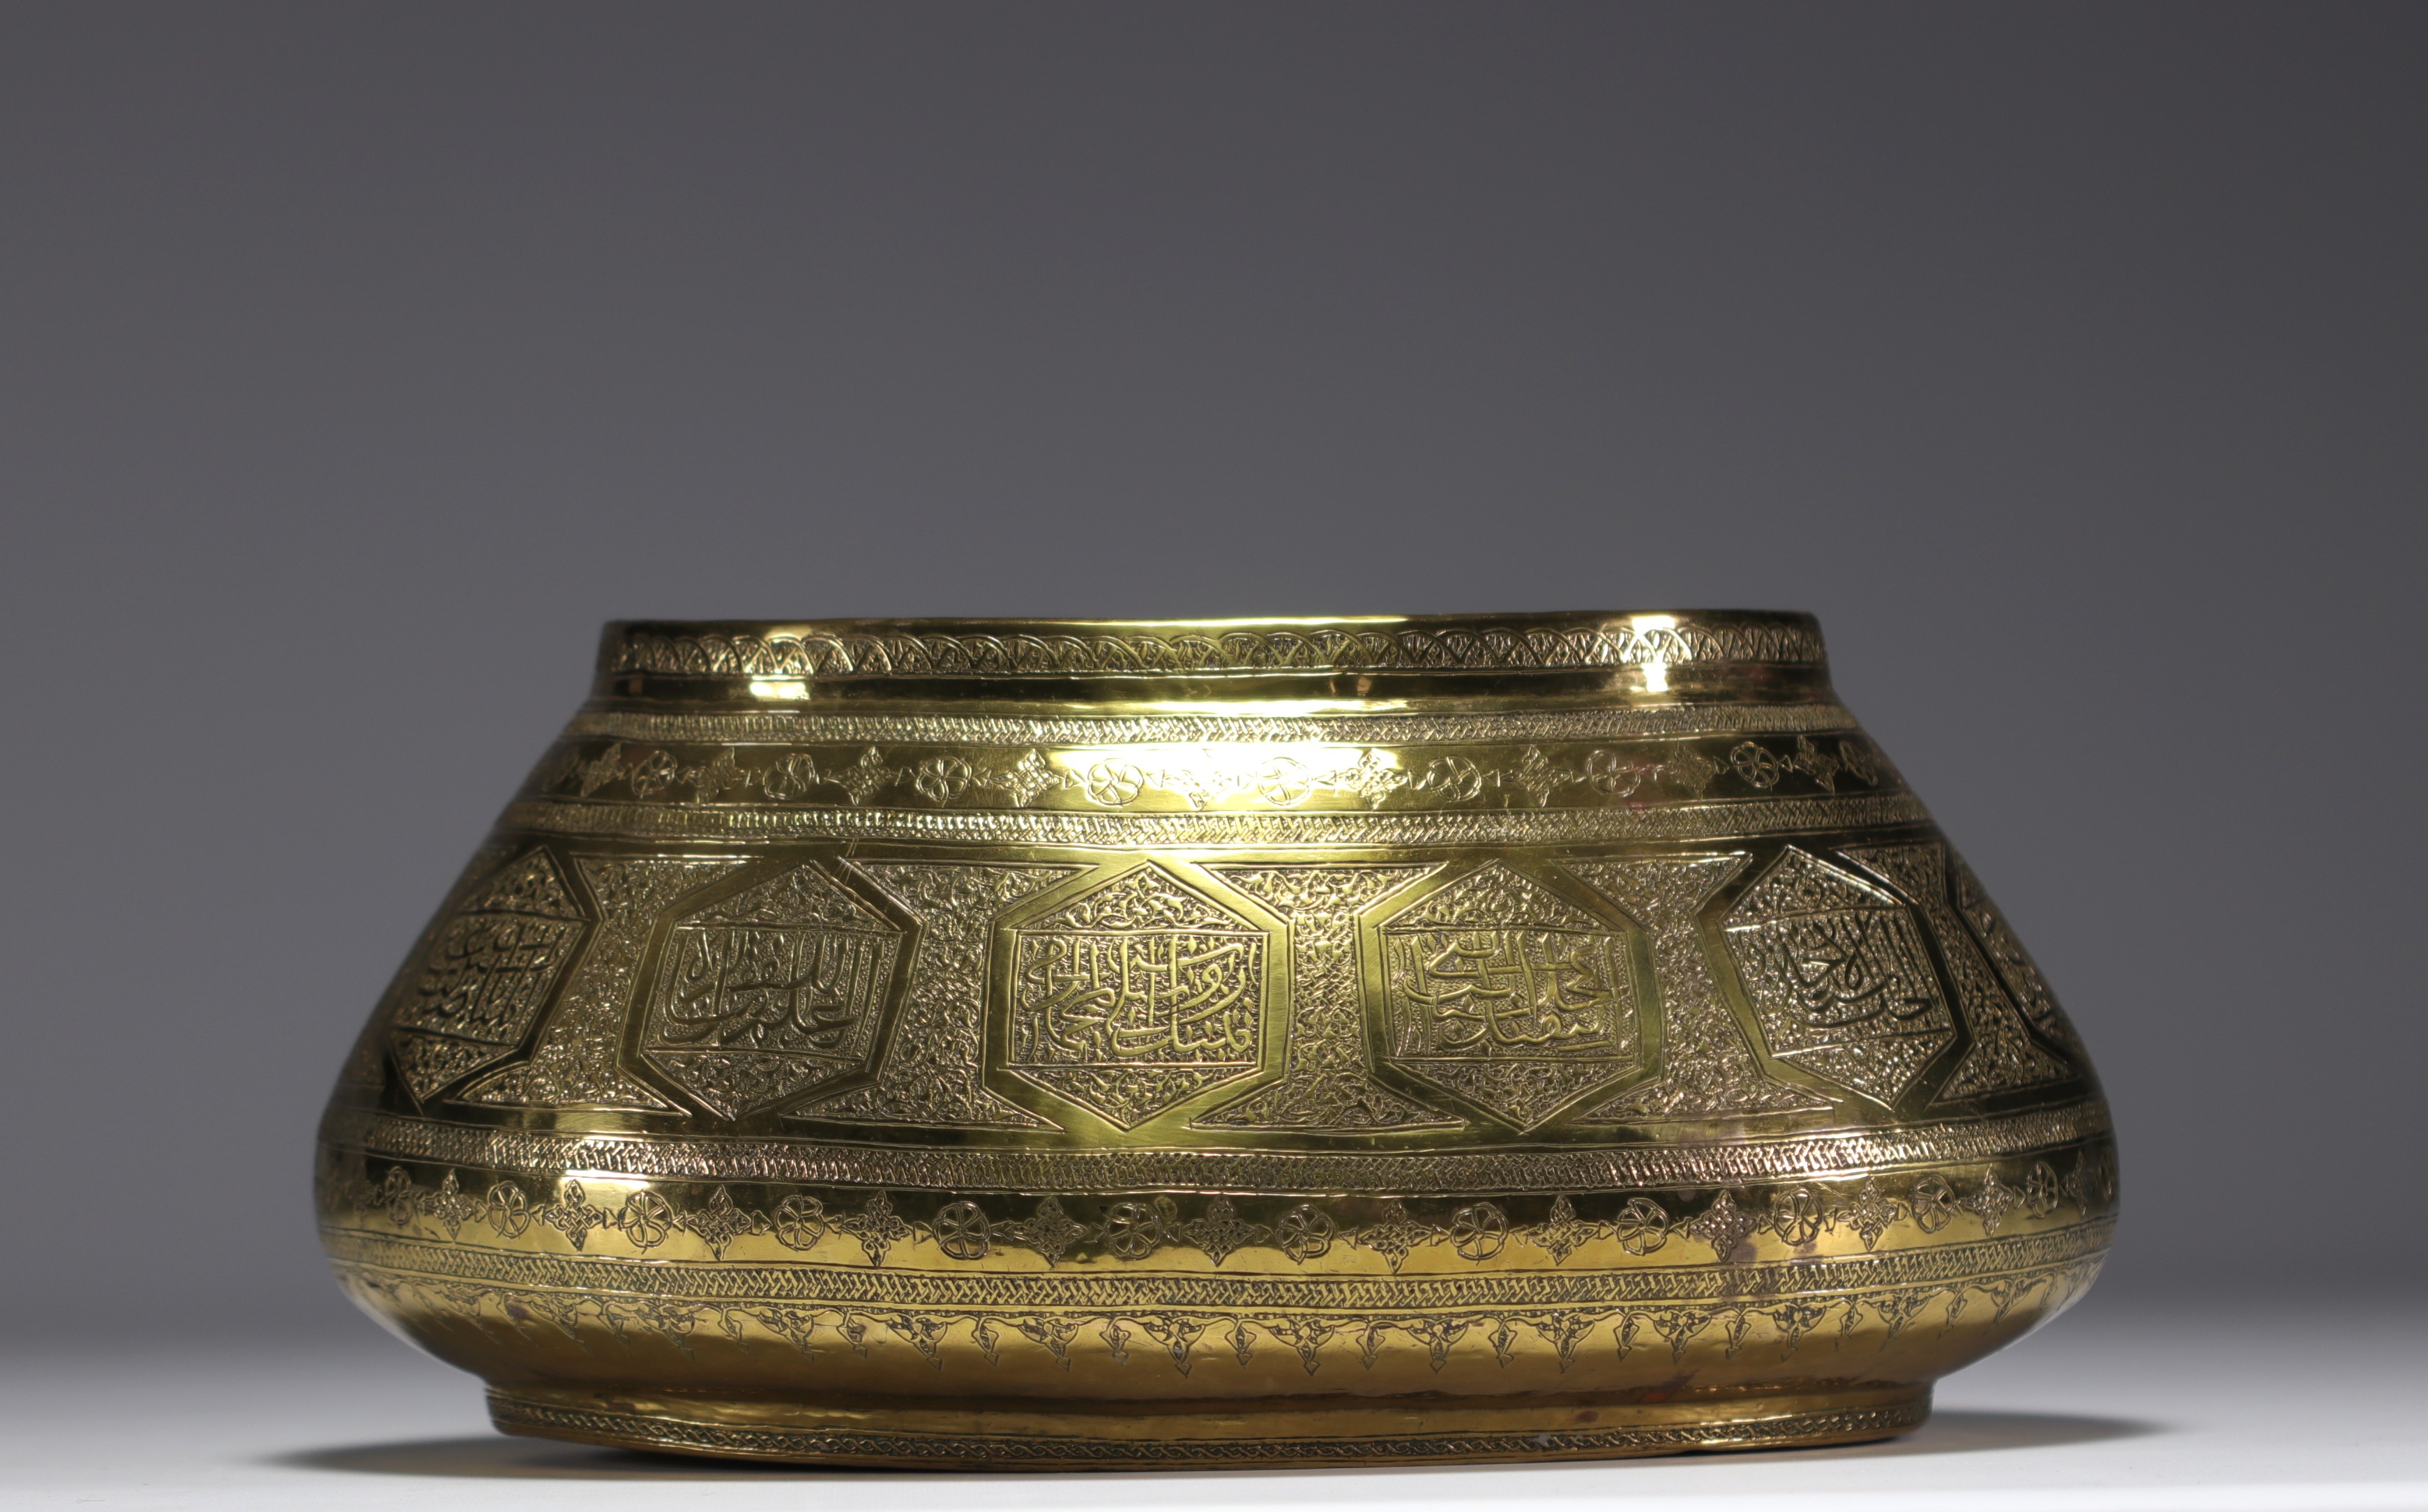 Iran - An old chased brass "Tas" basin decorated with flowers and wishes, 19th century. - Image 3 of 3